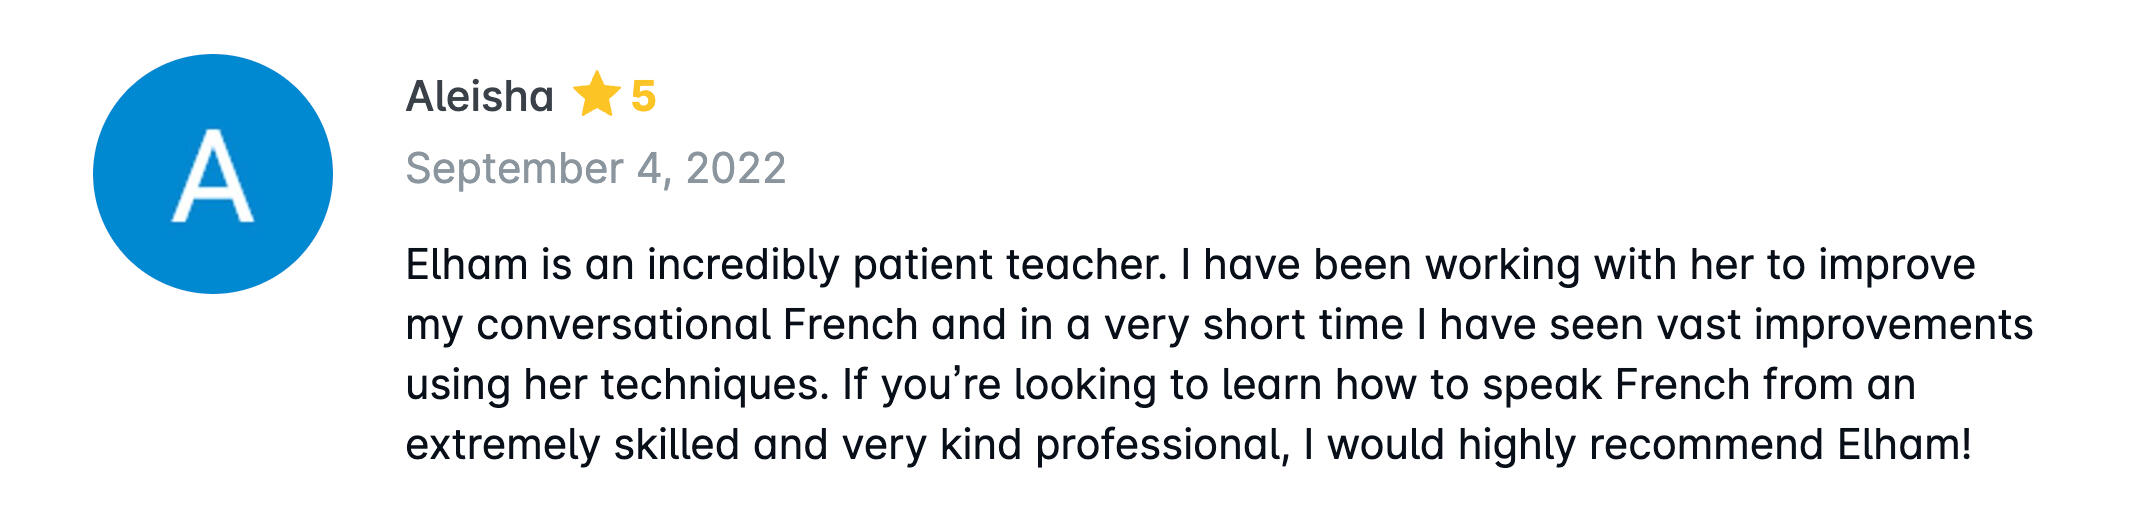 Elham is an incredibly patient teacher. I have been working with her to improve my conversational French and in a very short time I have seen vast improvements using her techniques. If you’re looking to learn how to speak French from an extremely skilled a